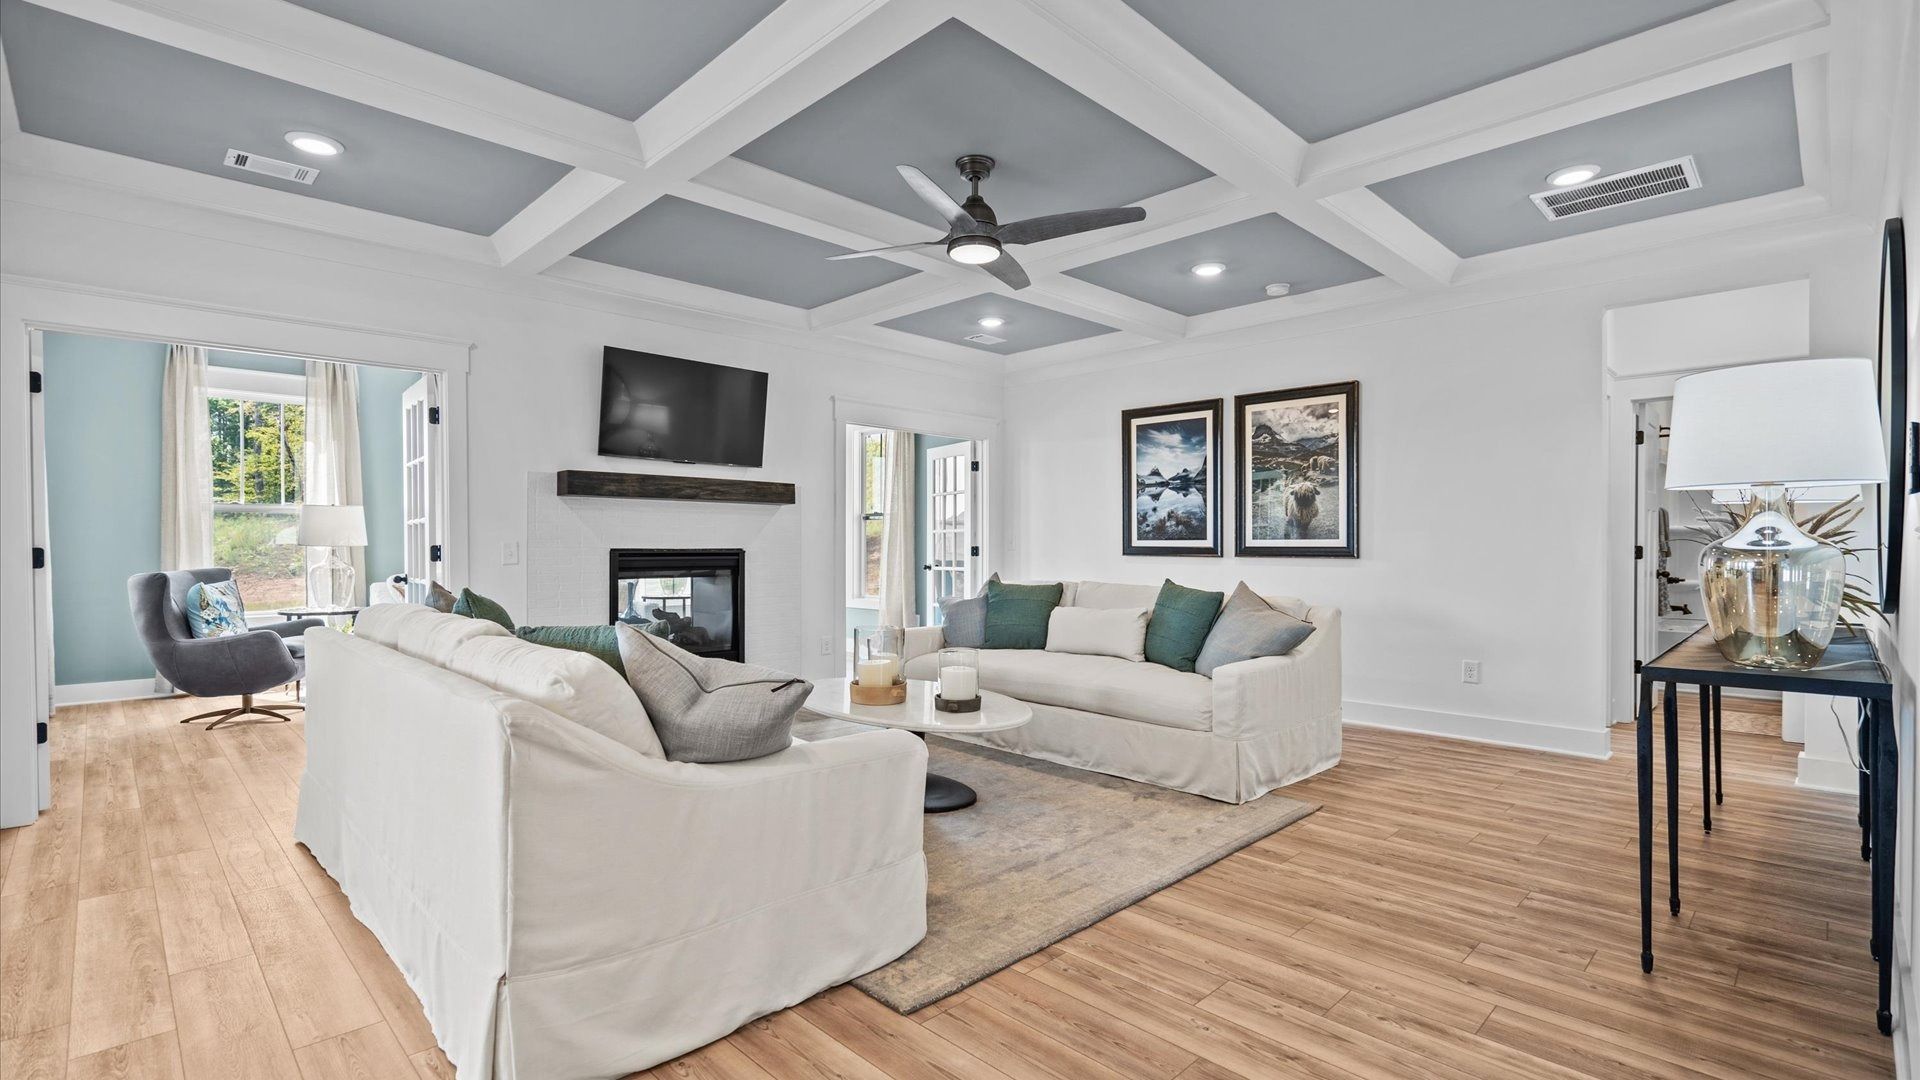 Family Room:New homes in Anderson, SC!